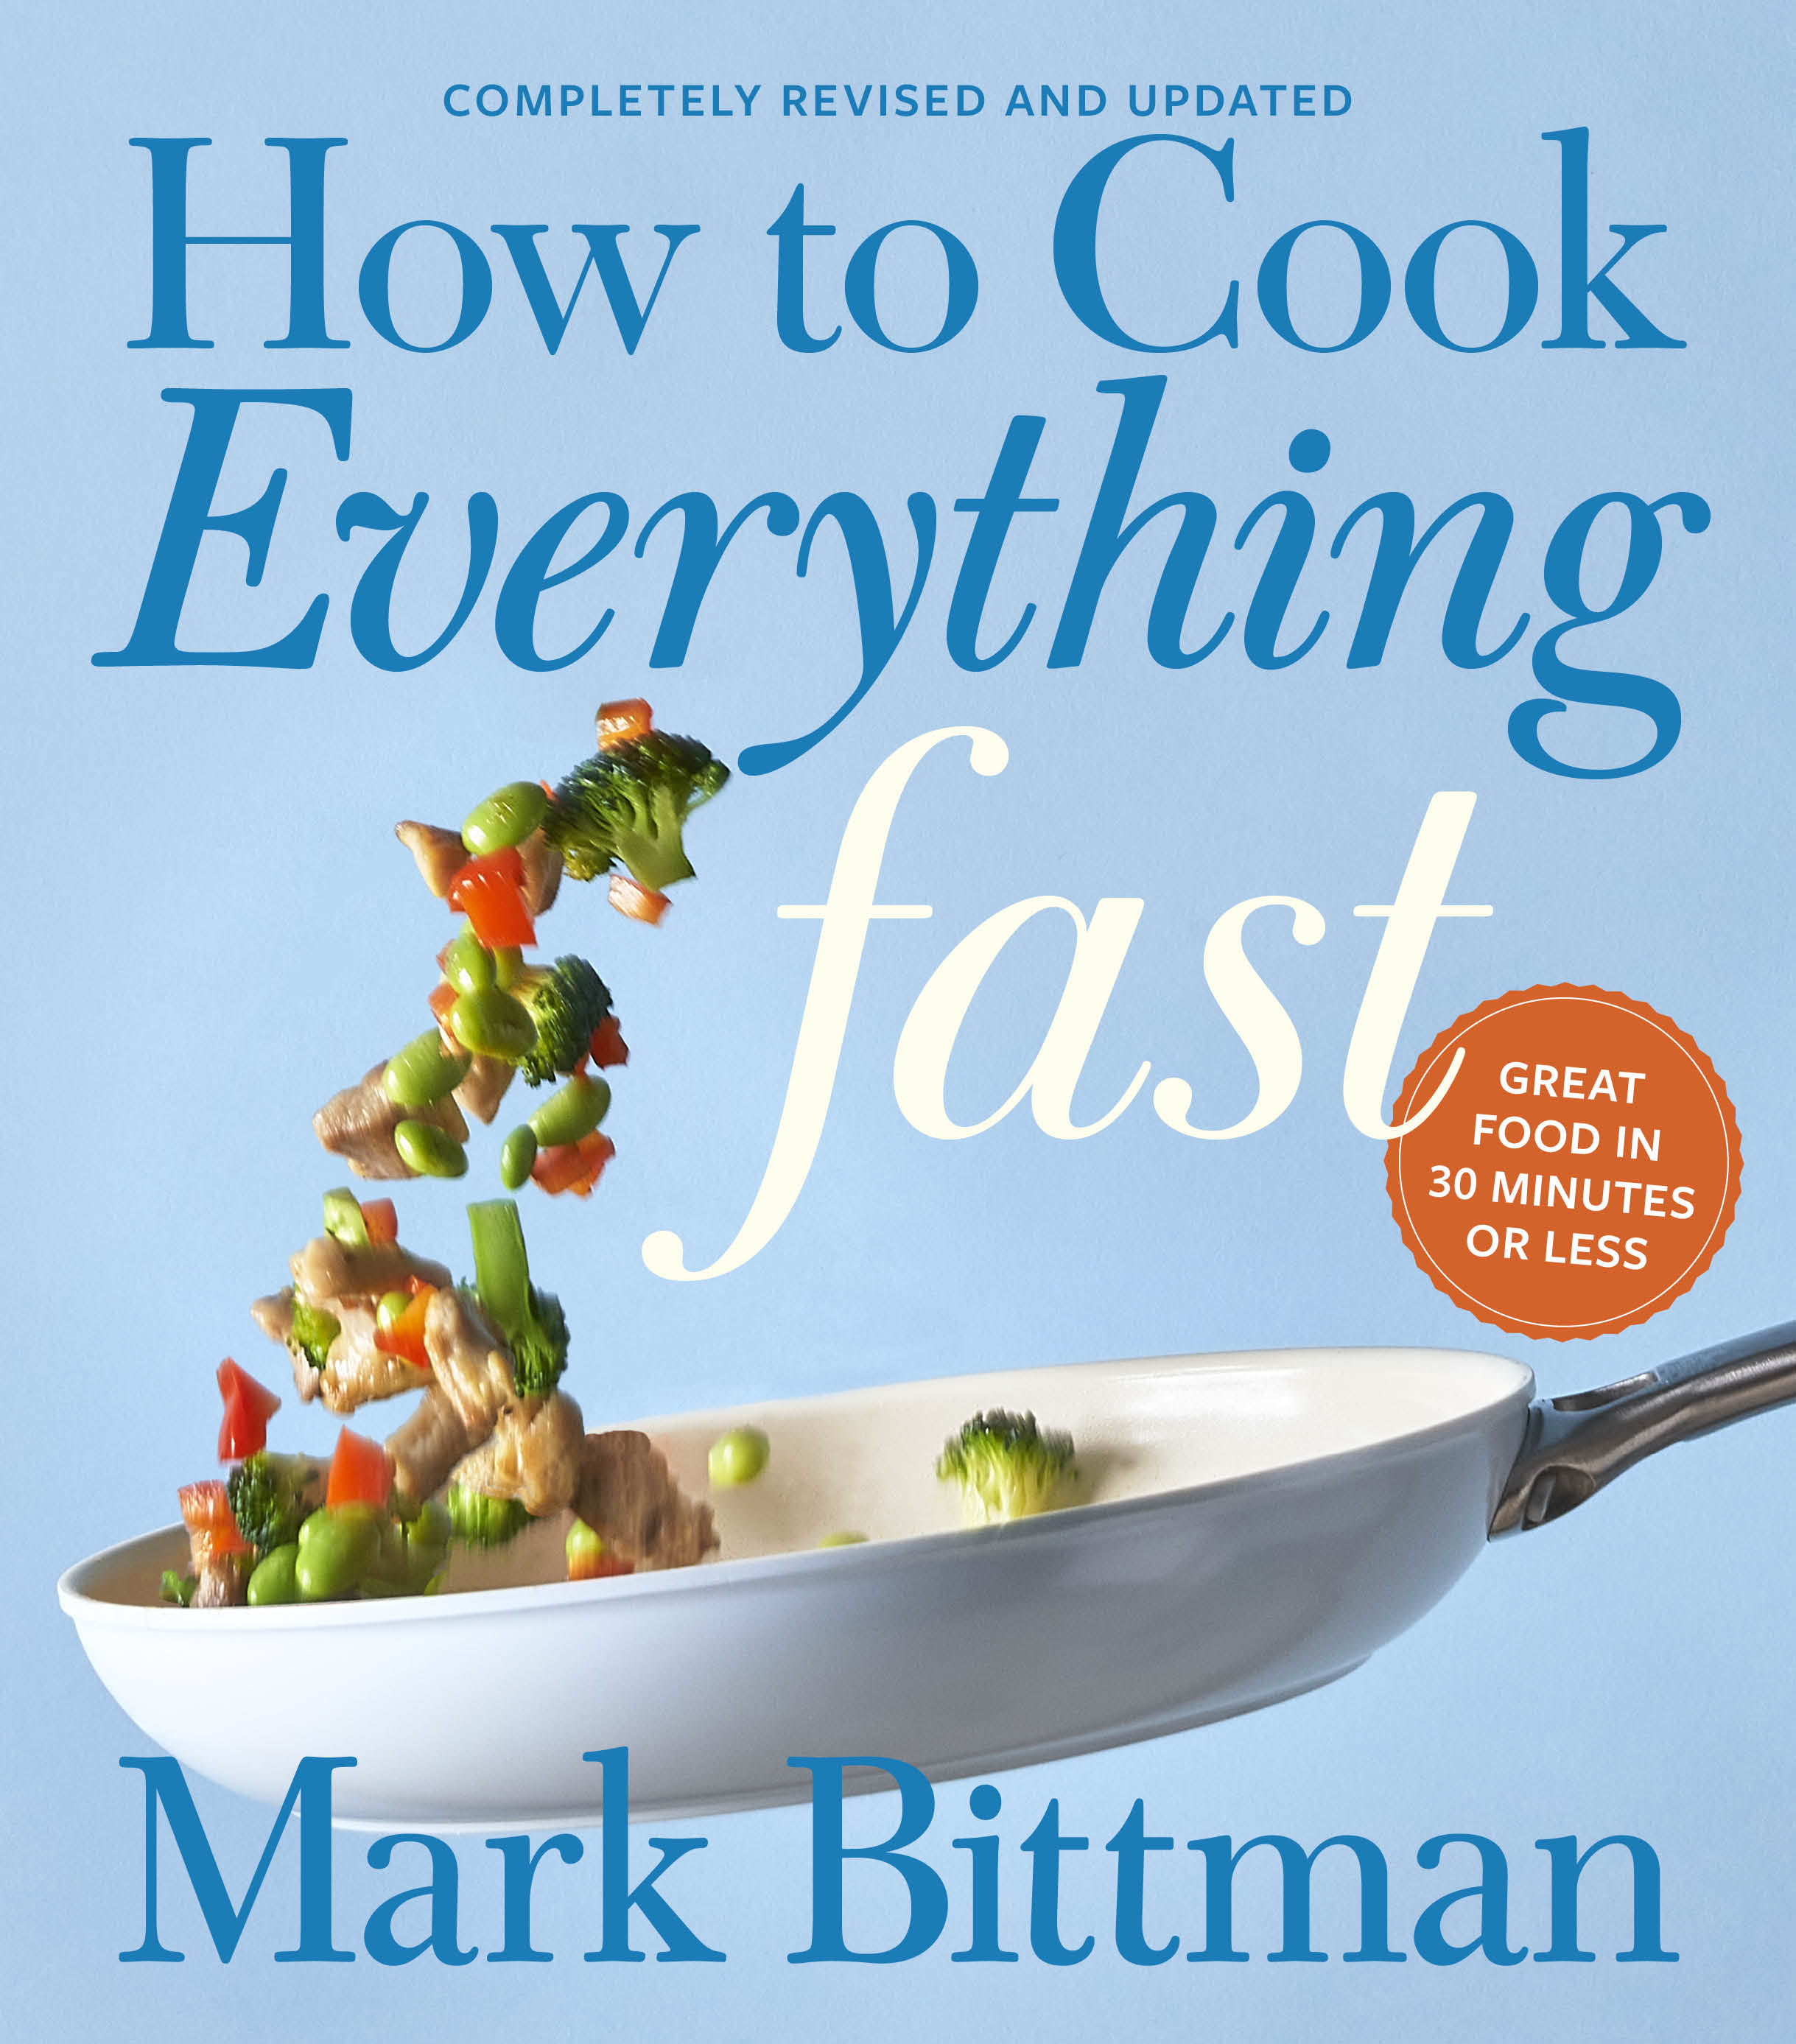 The cover of Mark Bittman's "How to Cook Everything Fast."